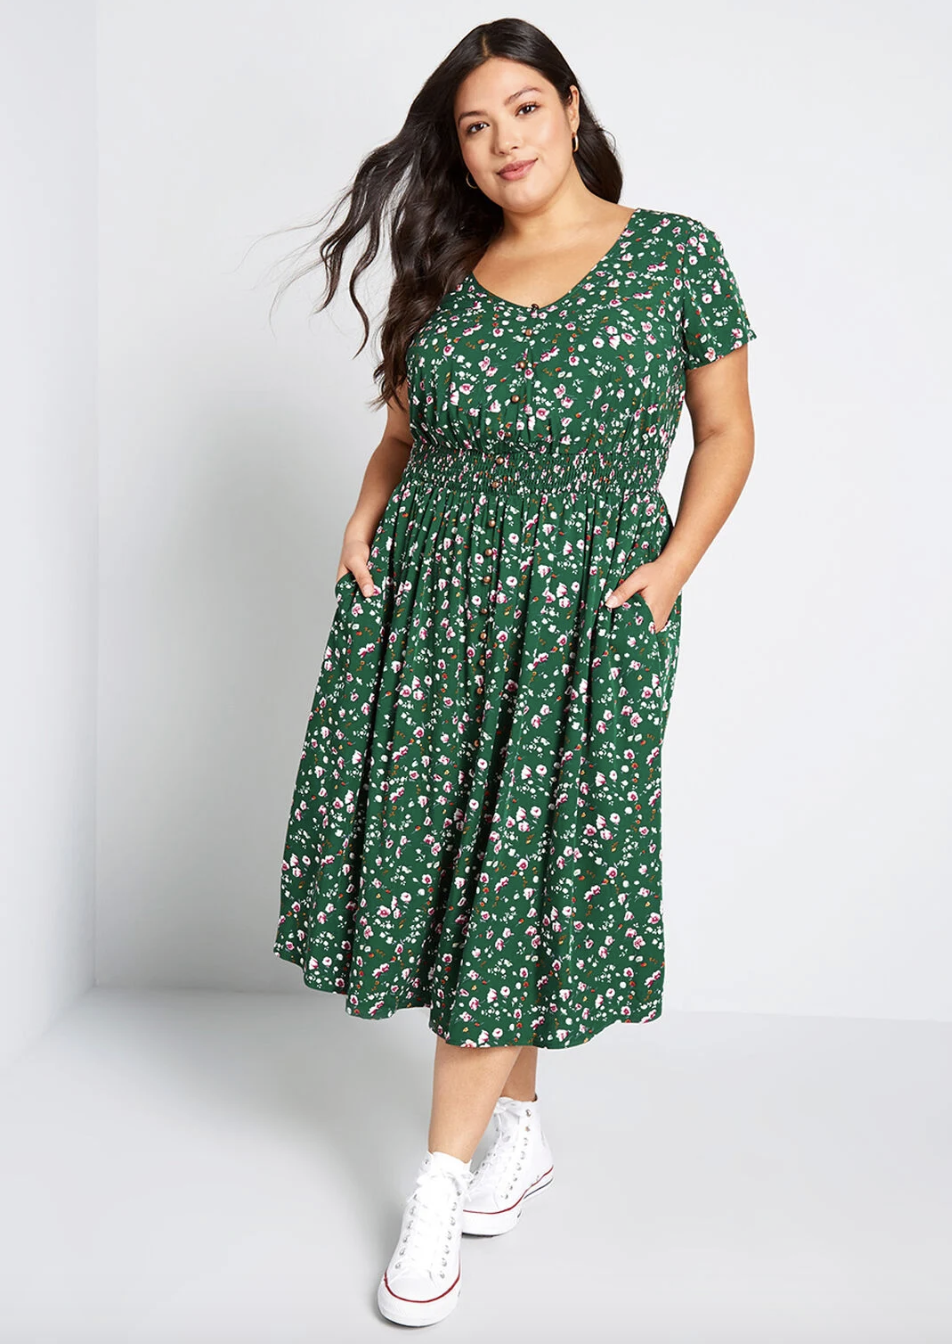 You Can Get Summery Finds At ModCloth's Massive Sale-On-Sale